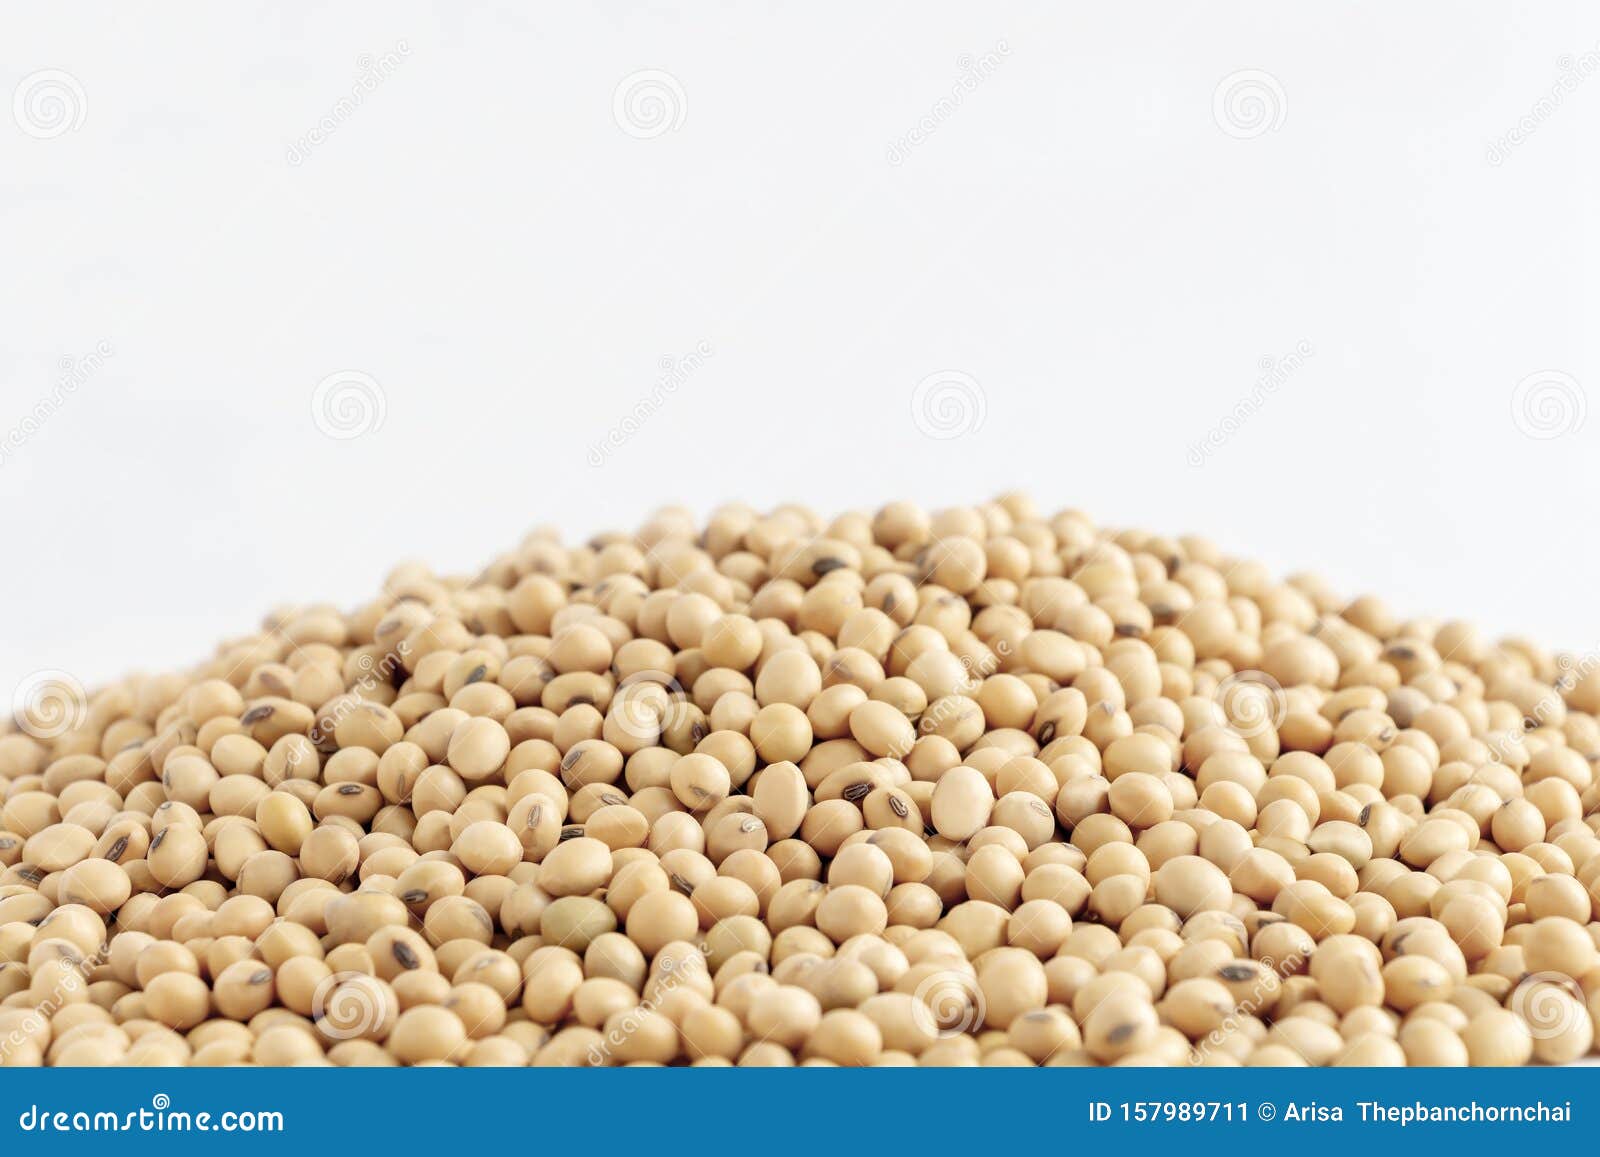 a lot of soybeans pile  on white background with copy space for text. concept food for healthy. soybean is a leguminous